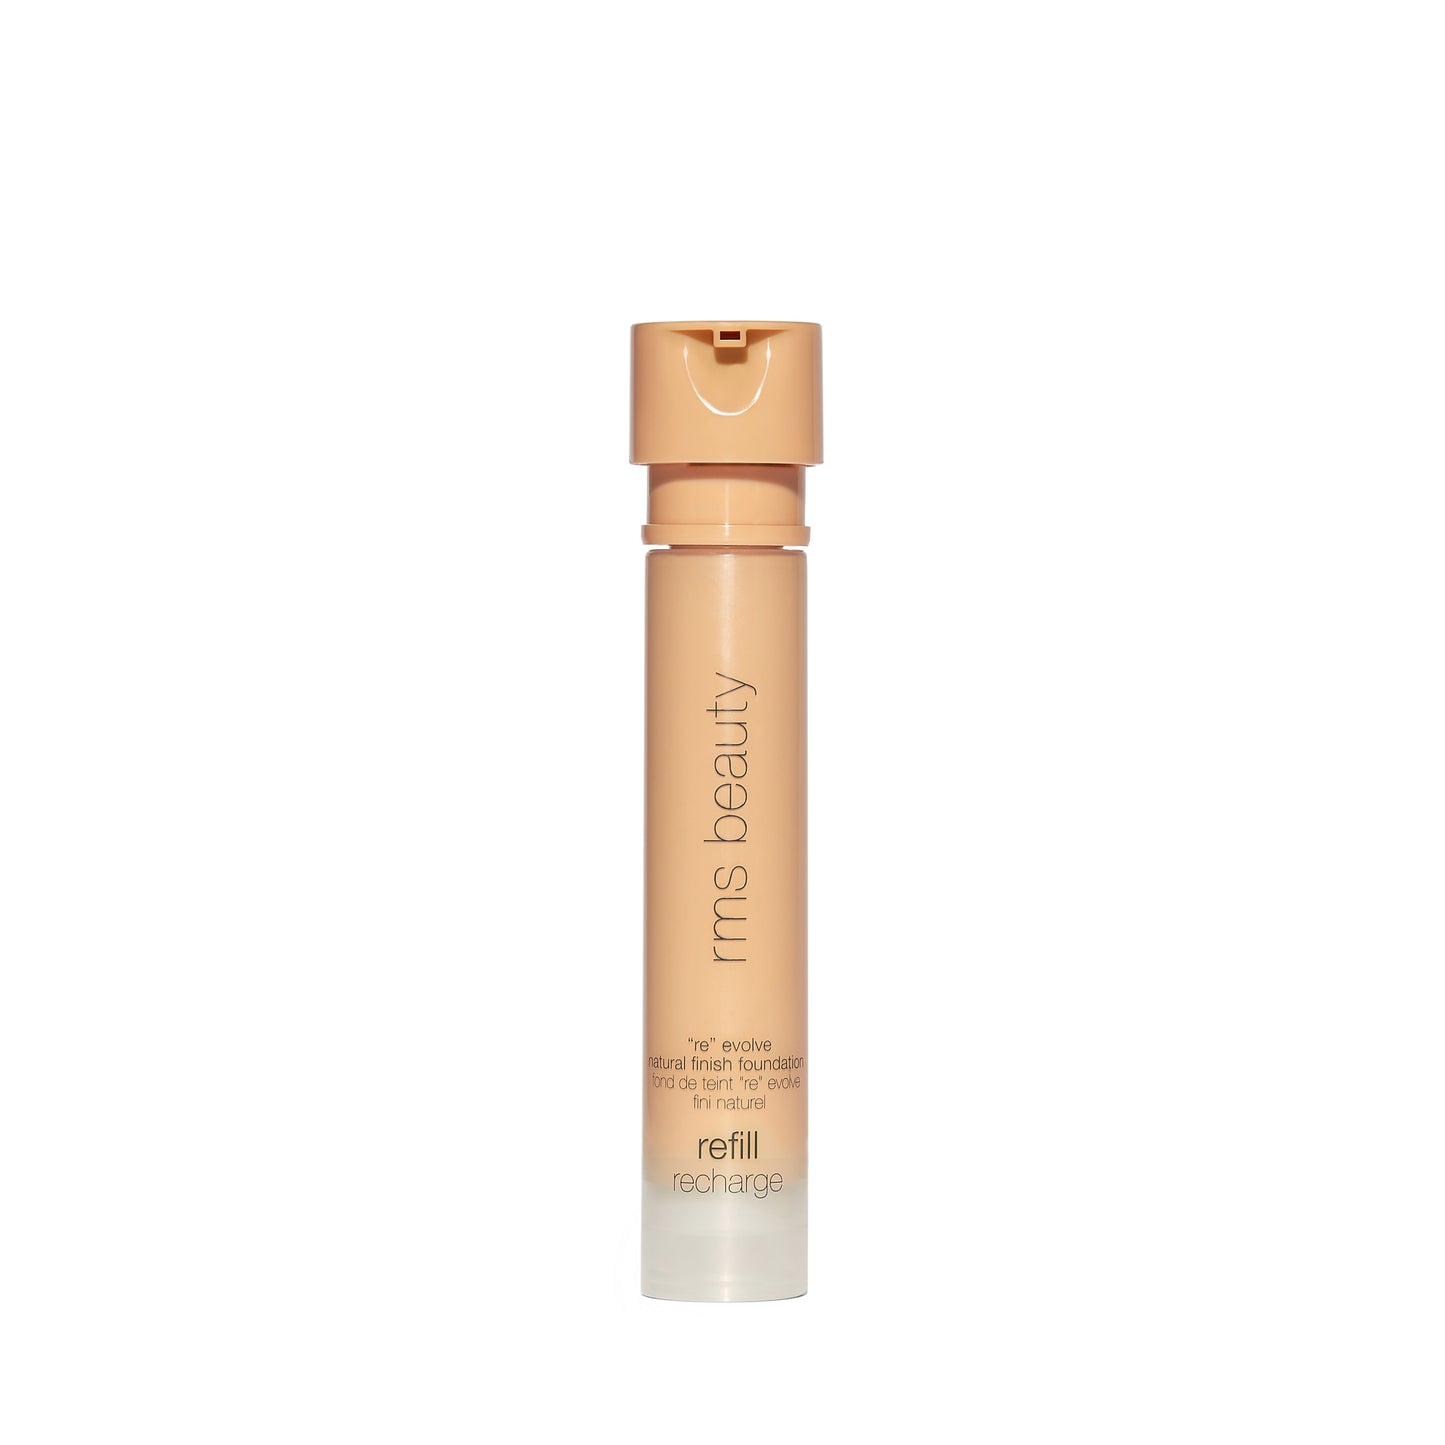 rms - REFILL ReEvolve natural finish foundation 29ml